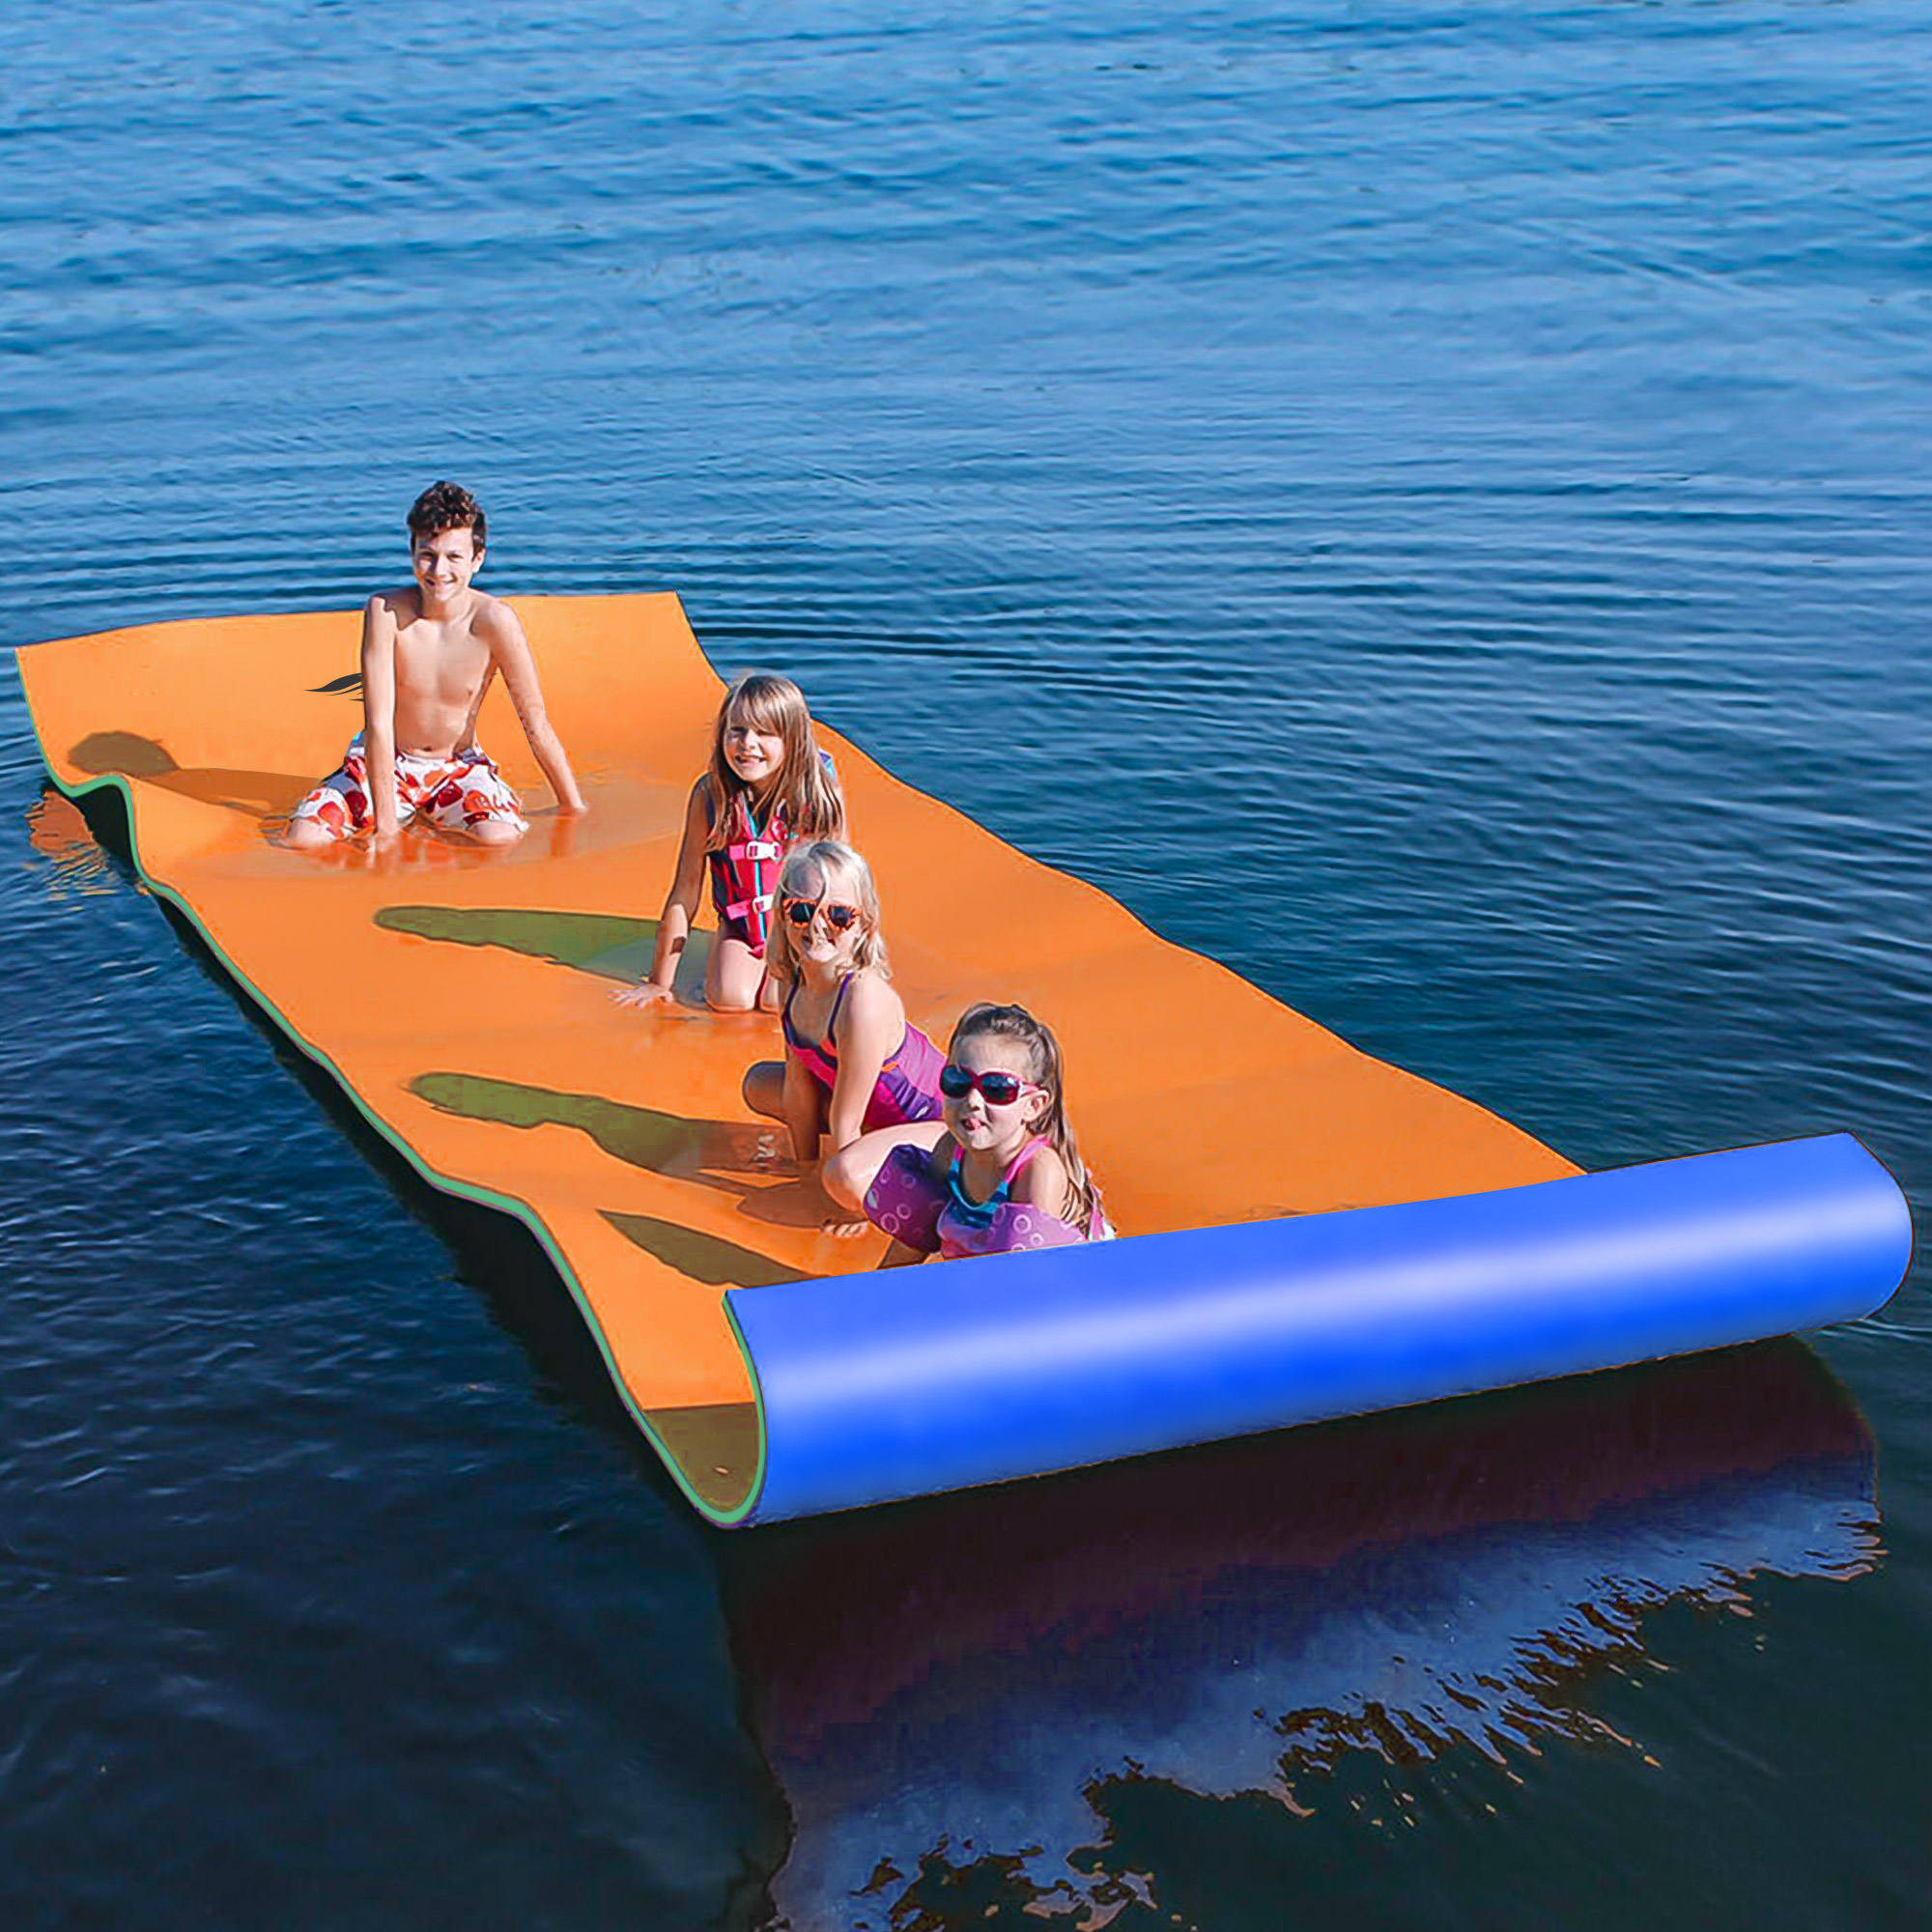 12 x 6 FT Floating Water Mat Foam Pad Lake Floats Lily Pad, 3-Layer XPE Water Pad with Storage Straps for Adults Outdoor Water Activities-CASAINC